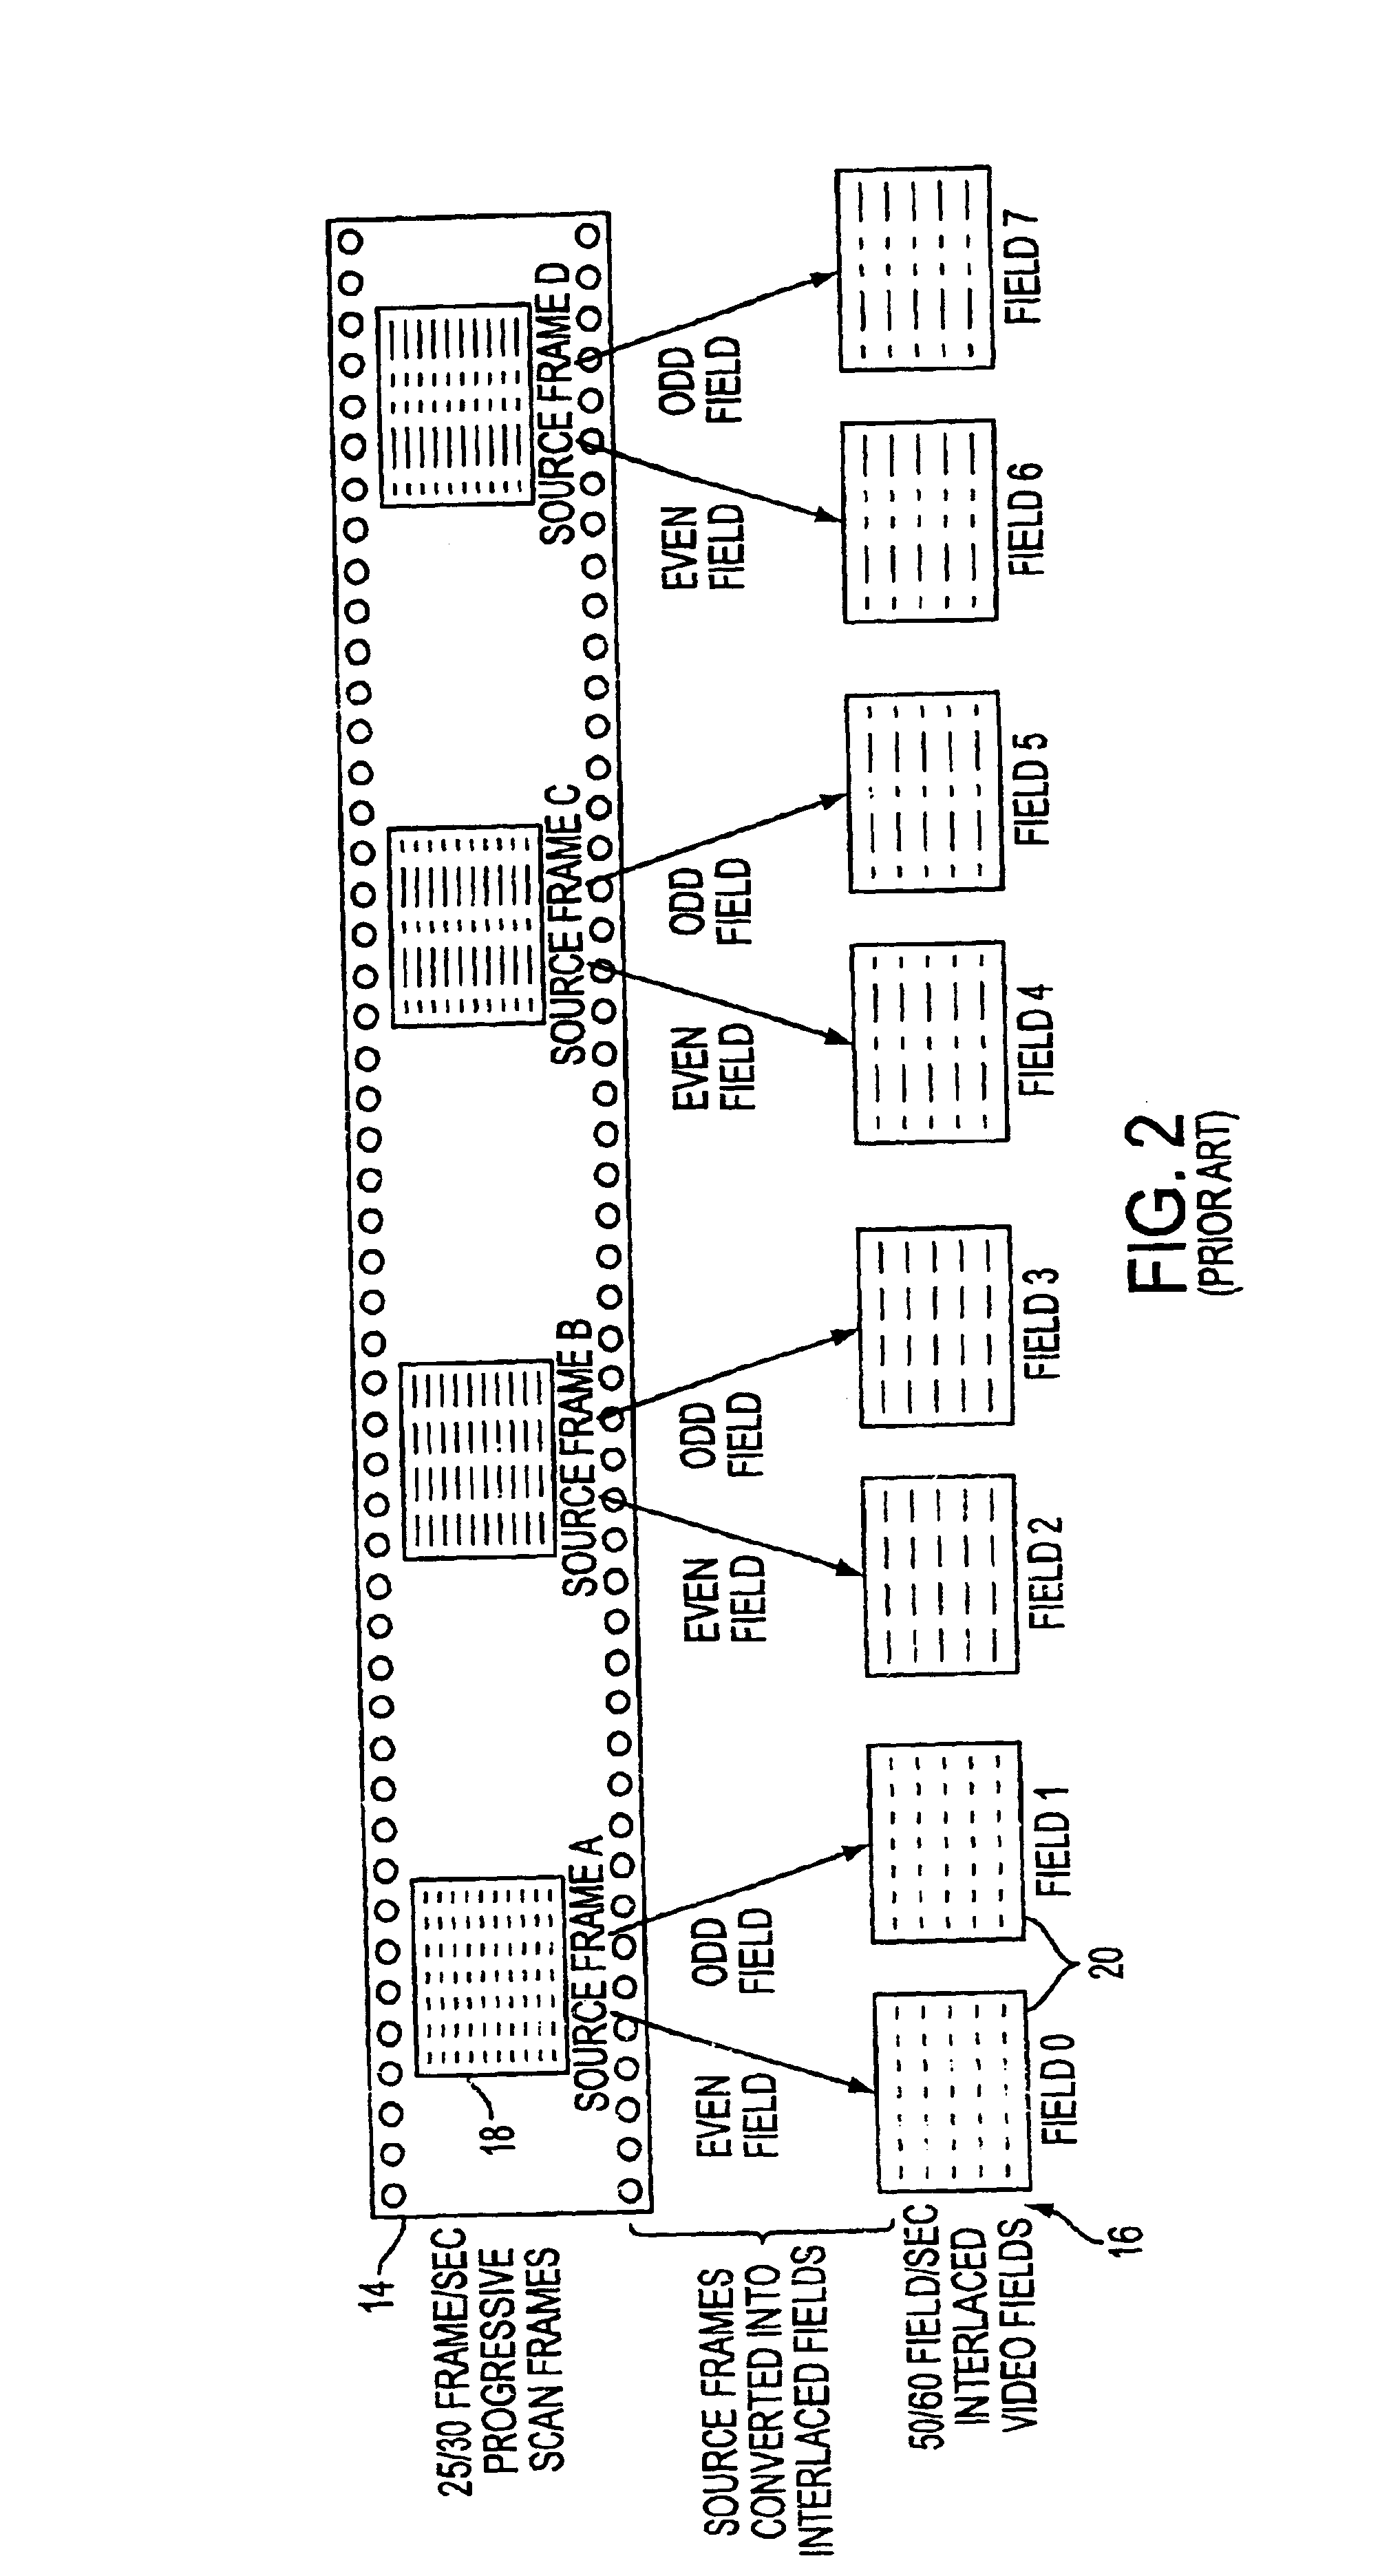 Method, system and article of manufacture for identifying the source type and quality level of a video sequence